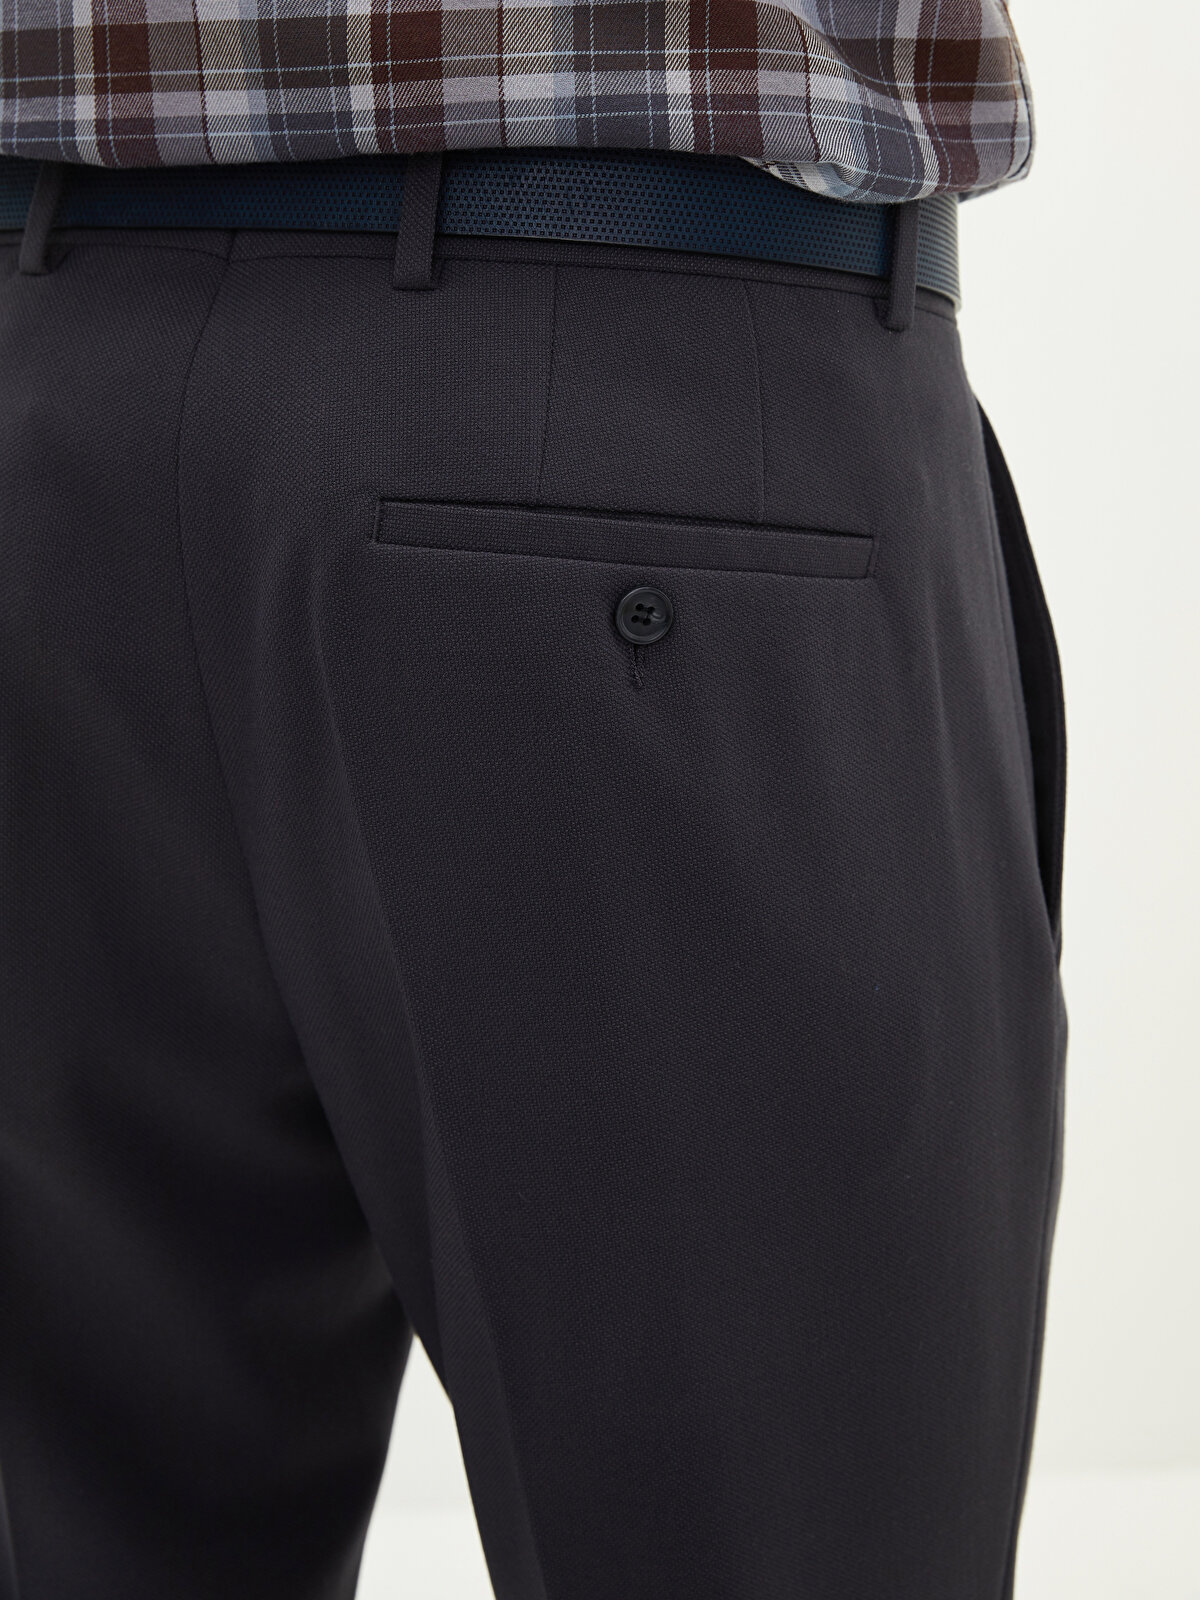 Regular Fit Luxury Corduroy Trouser | M&S Collection | M&S